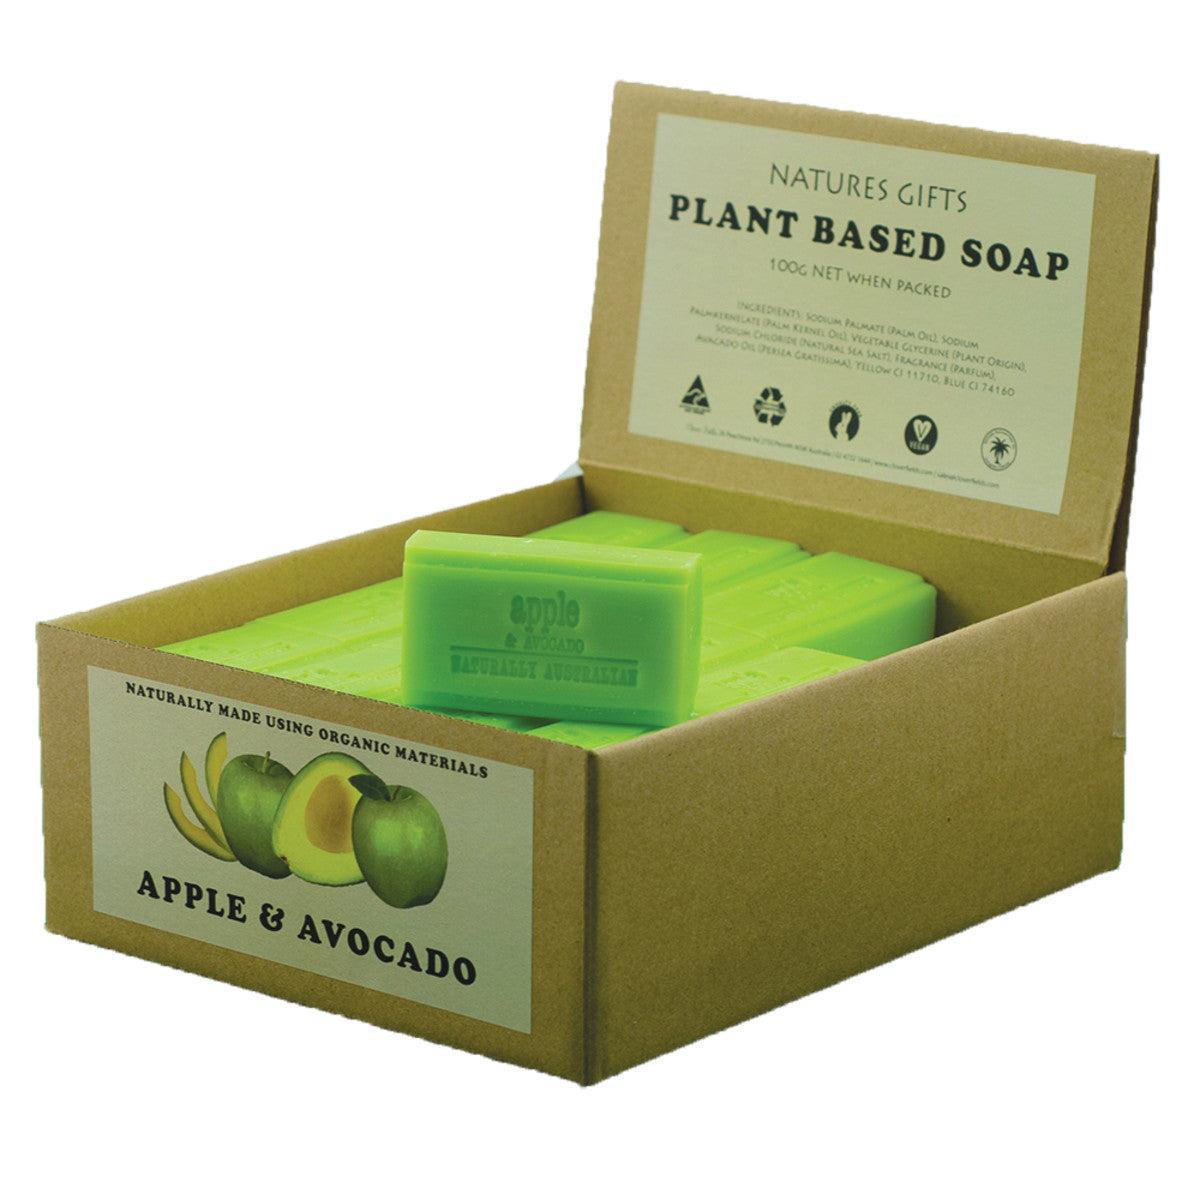 Clover Fields Natures Gifts Plant Based Soap Apple & Avocado 100g (Pack of 36)